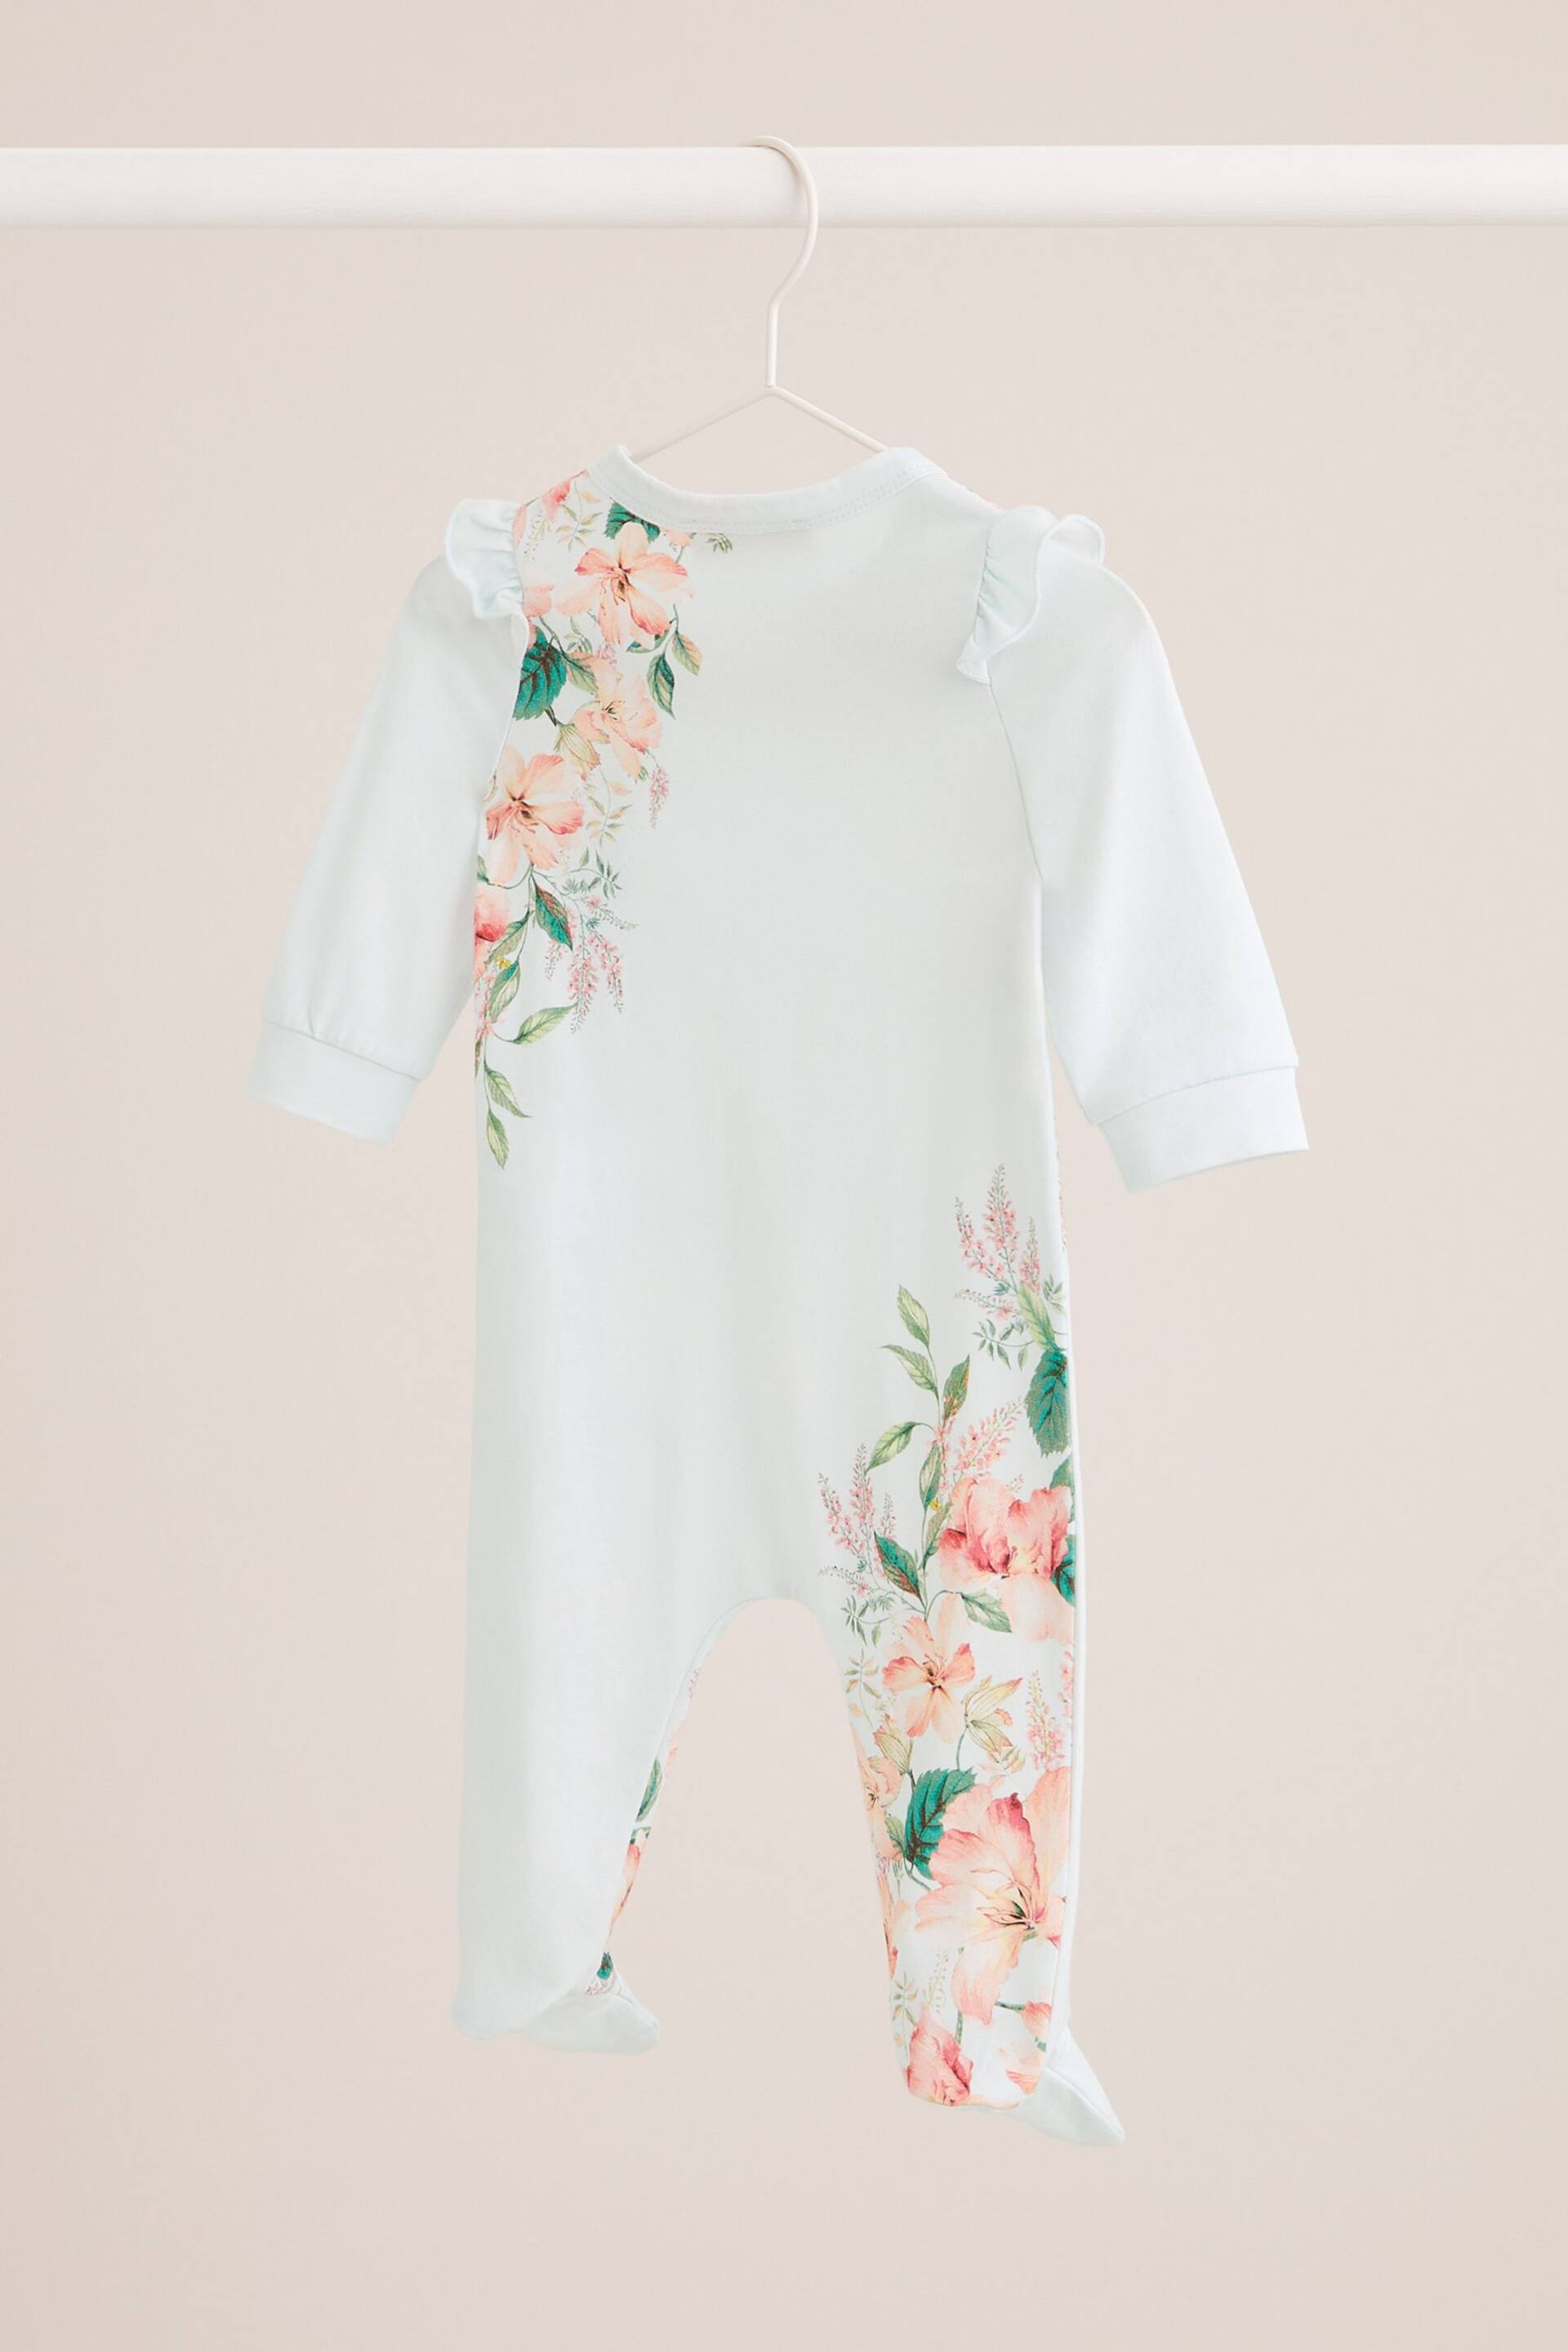 Lipsy Blue Floral Baby Sleepsuit - Image 3 of 4